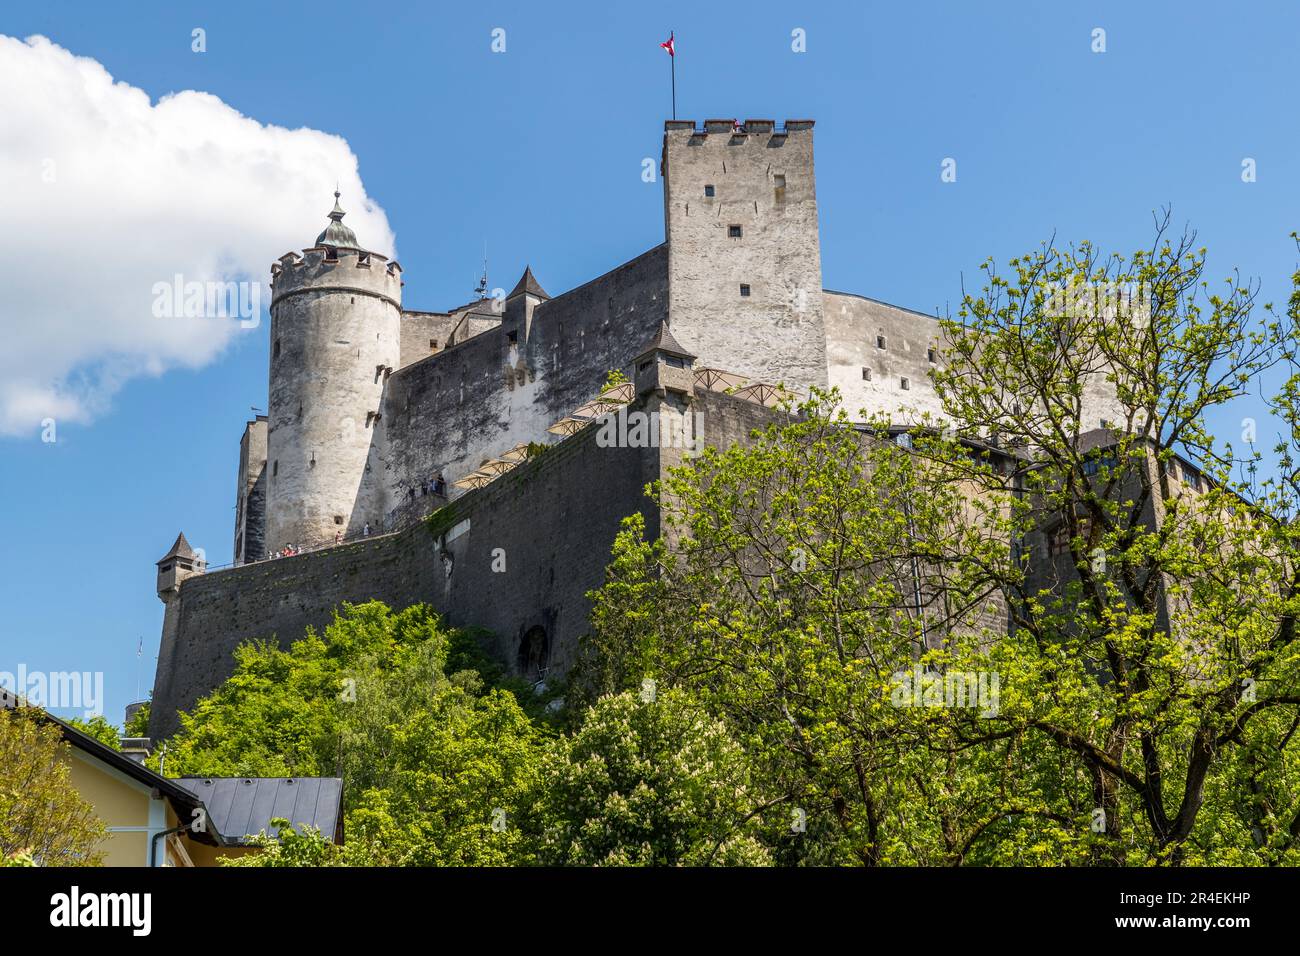 The Hohensalzburg Fortress, together with the Old Town of Salzburg, is a Unesco World Heritage Site. Salzburg, Austria Stock Photo